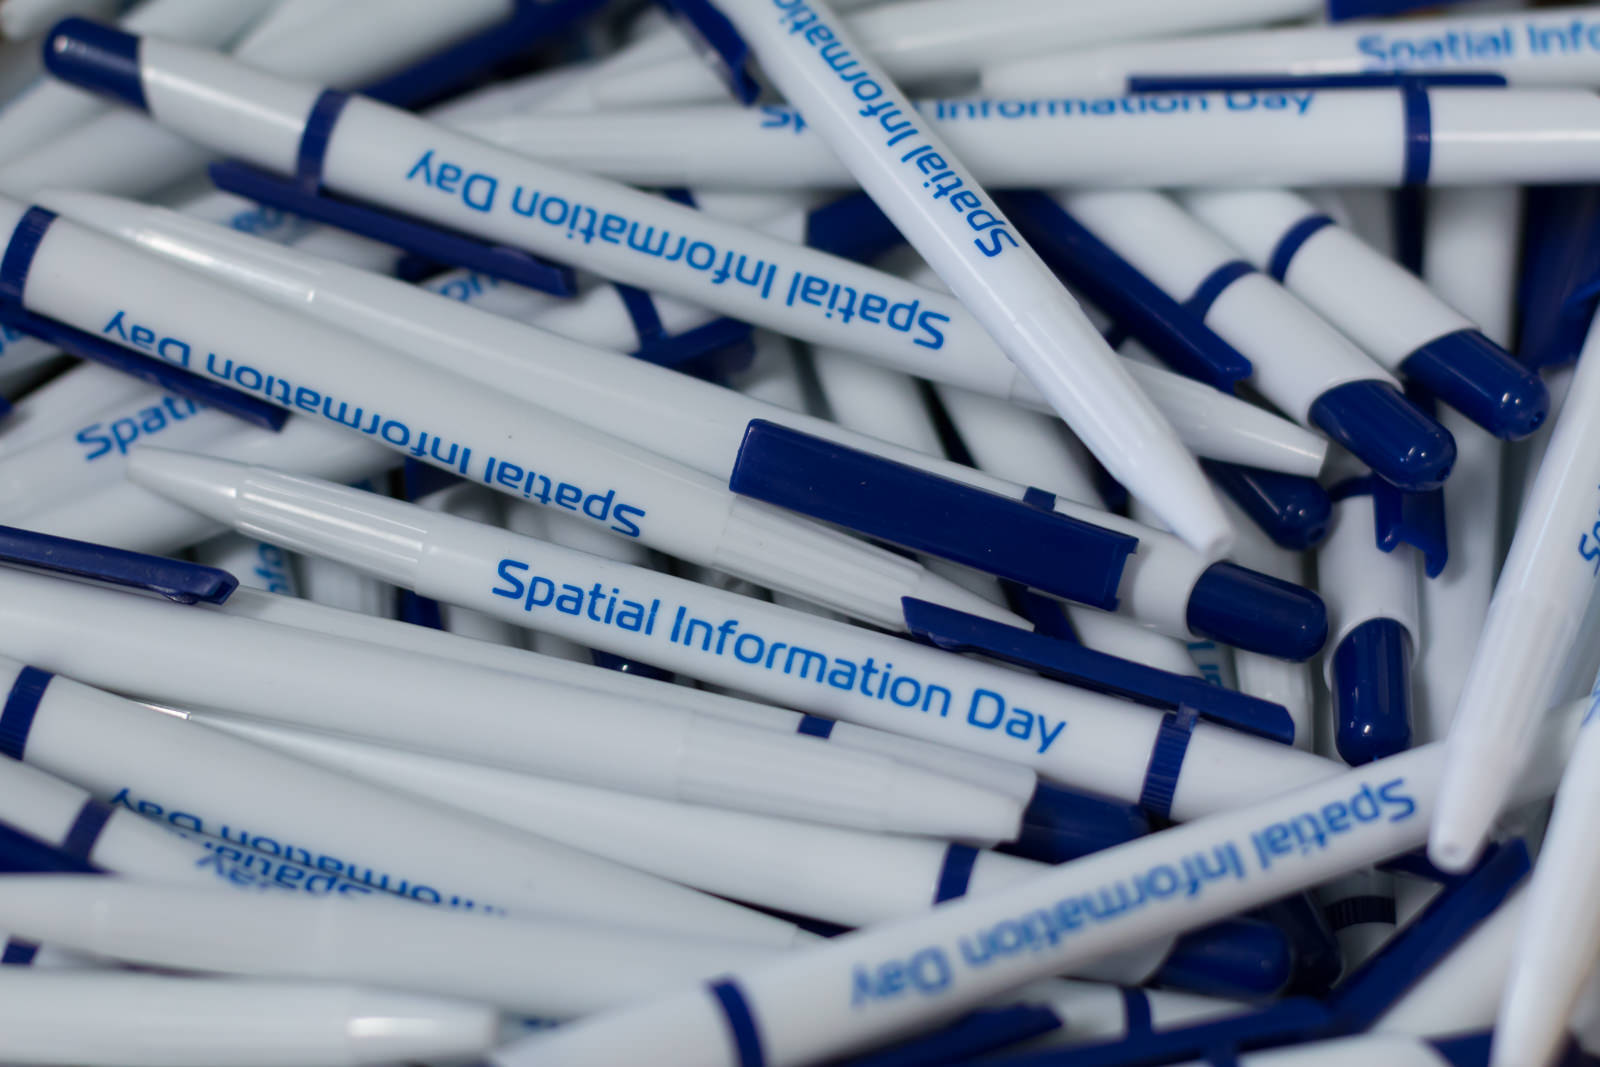 Photo of pens with Spatial Information Day logo on them